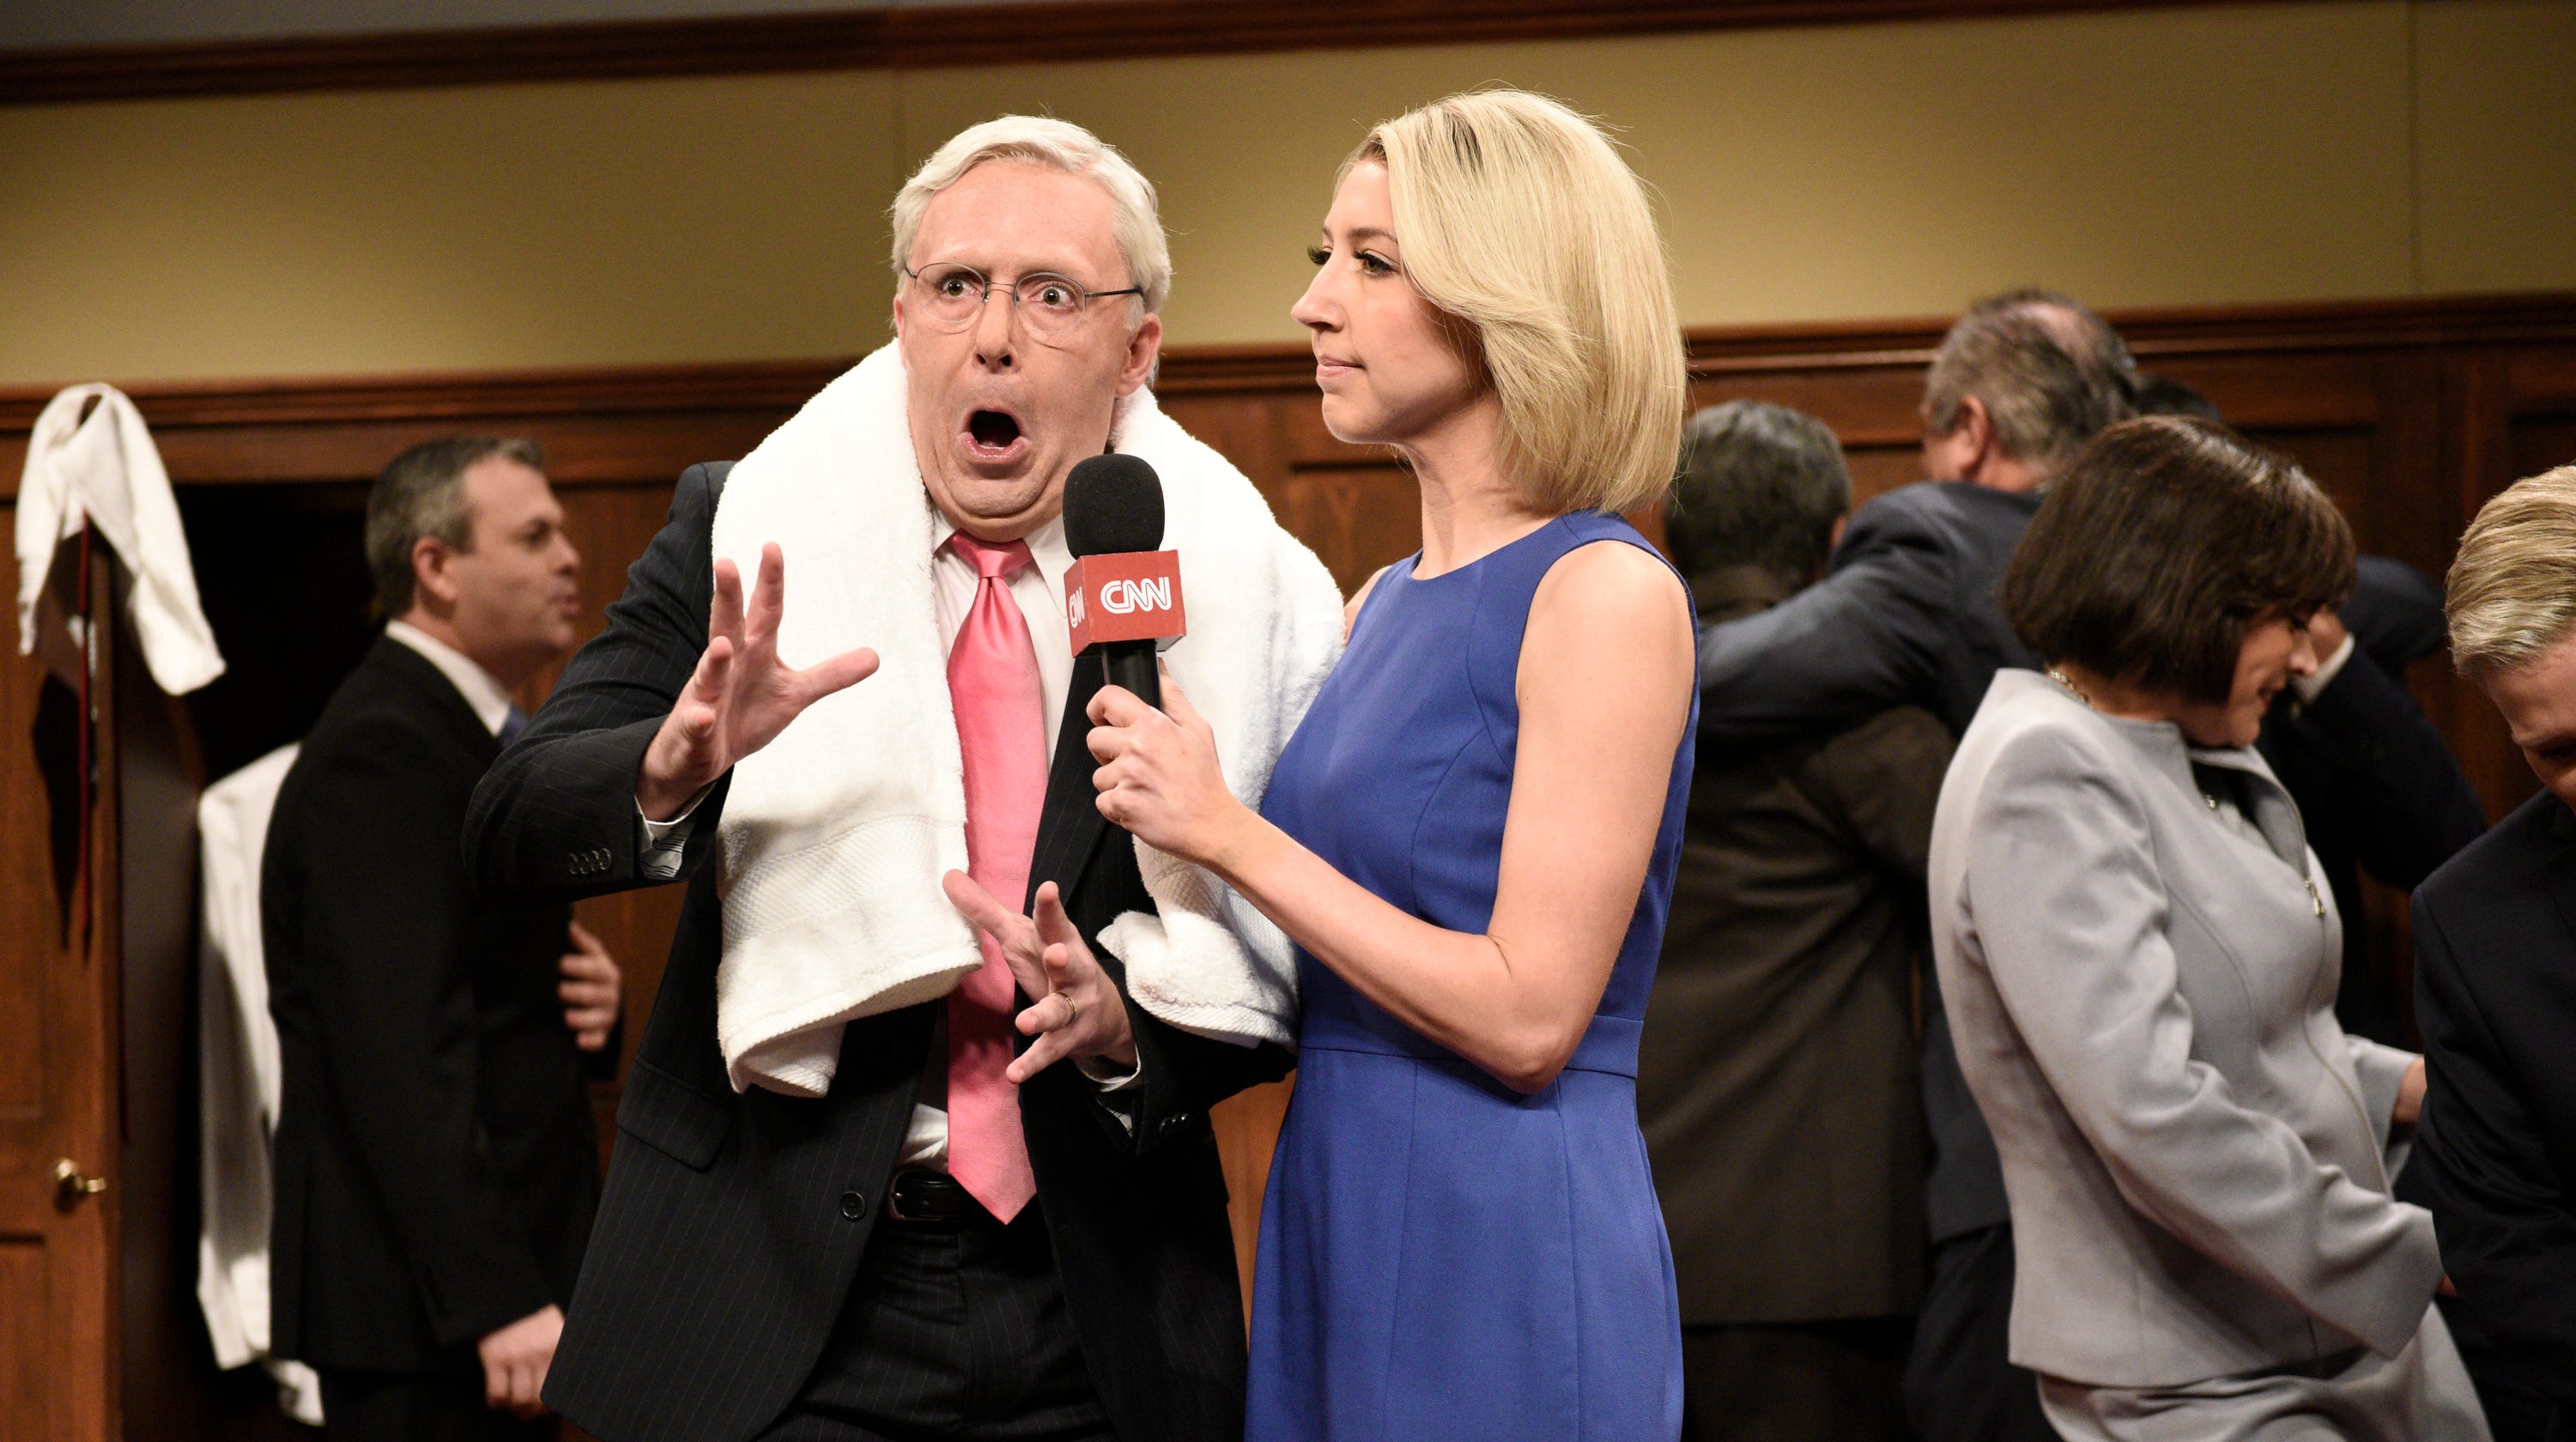 'SNL' in photos The best moments from 'Saturday Night Live' Season 44